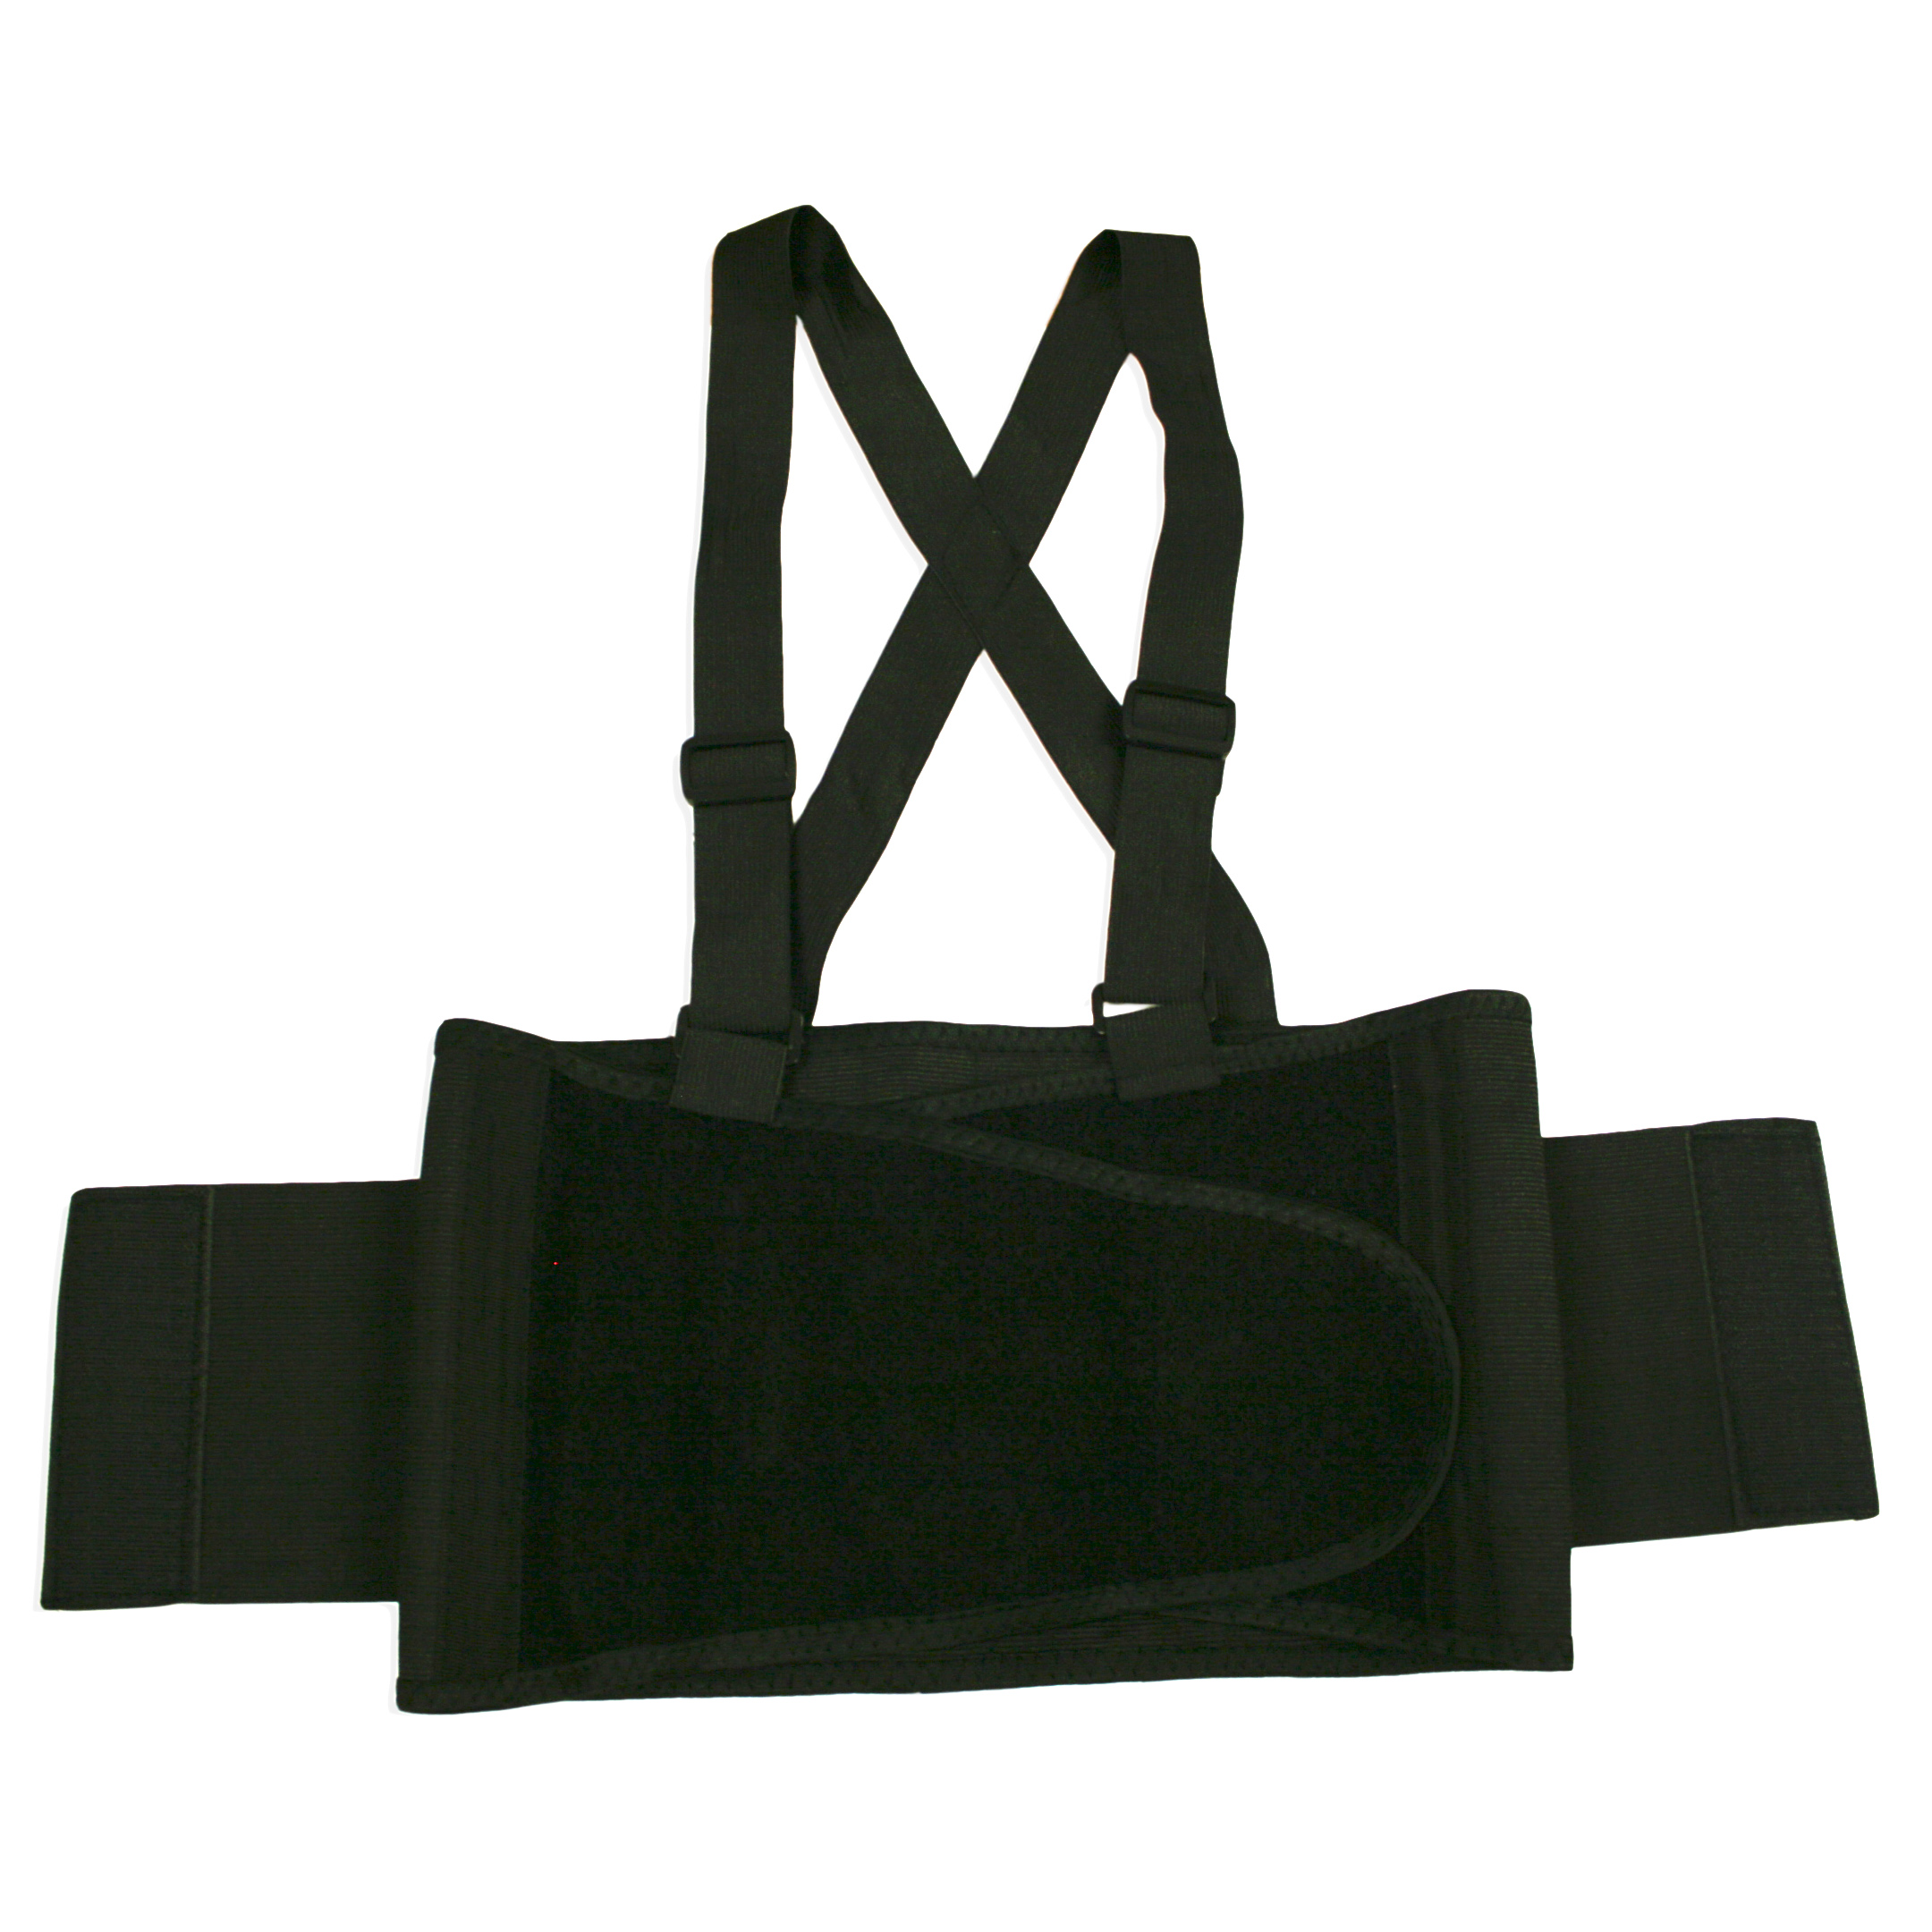 XXL Back Support, Attached
Suspenders